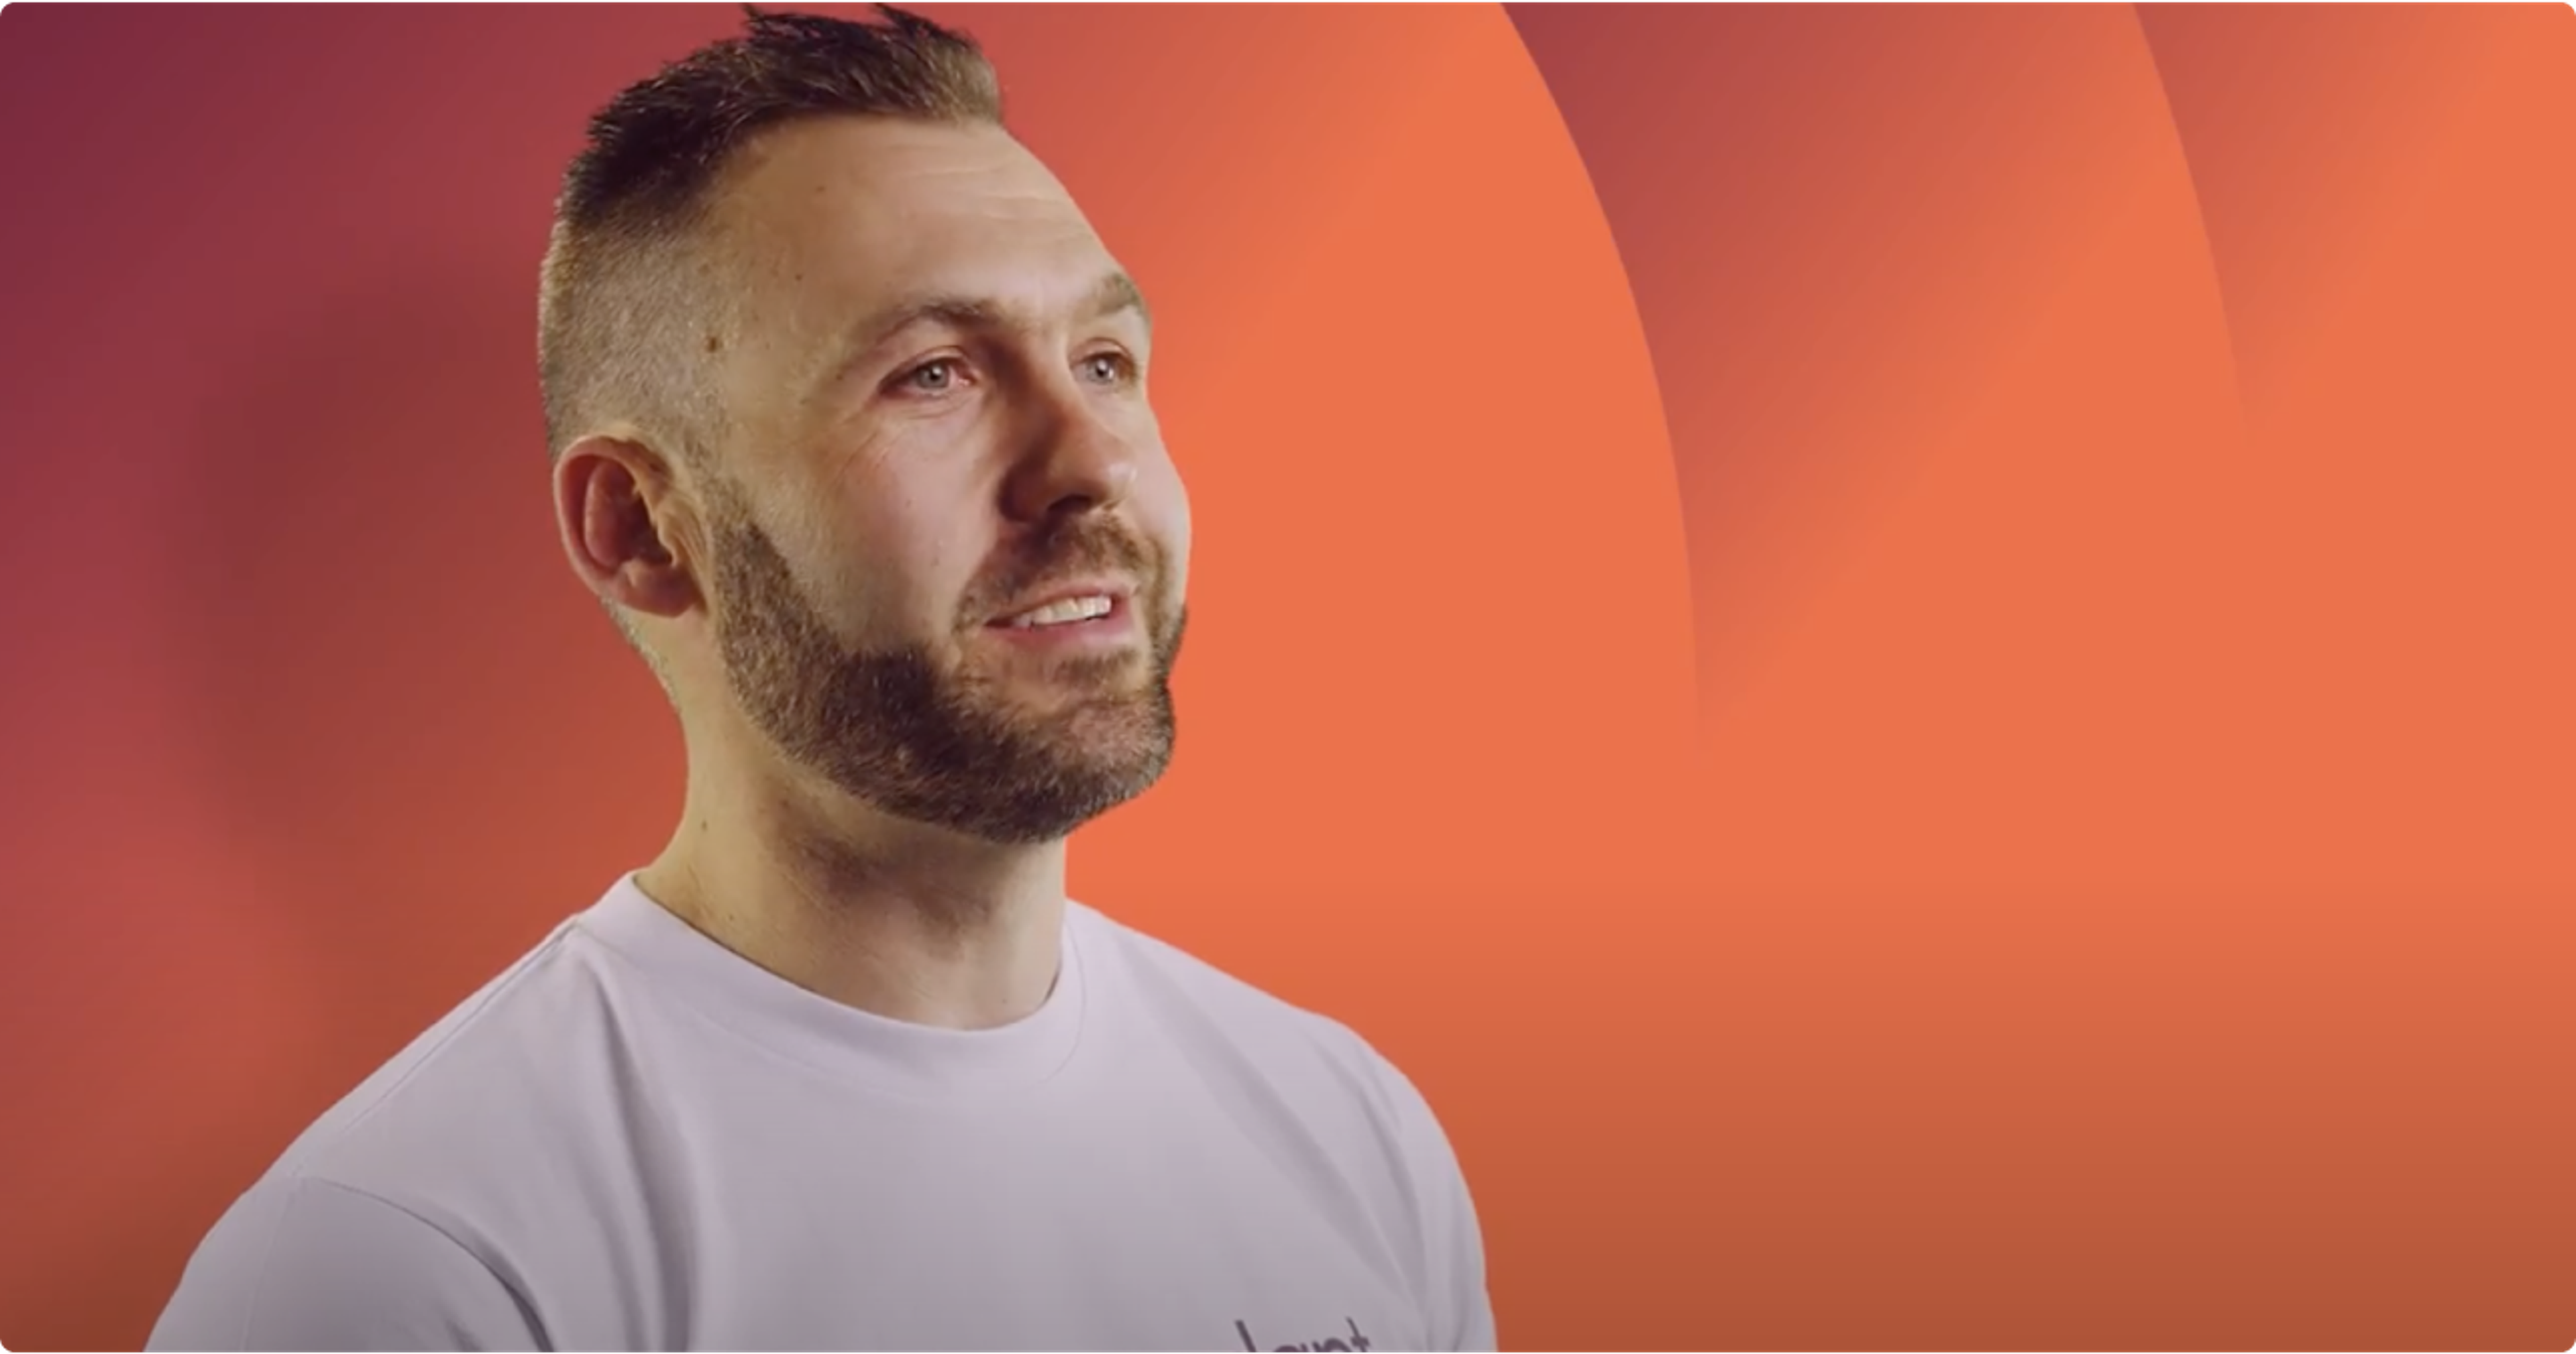 Interview in front of orange background